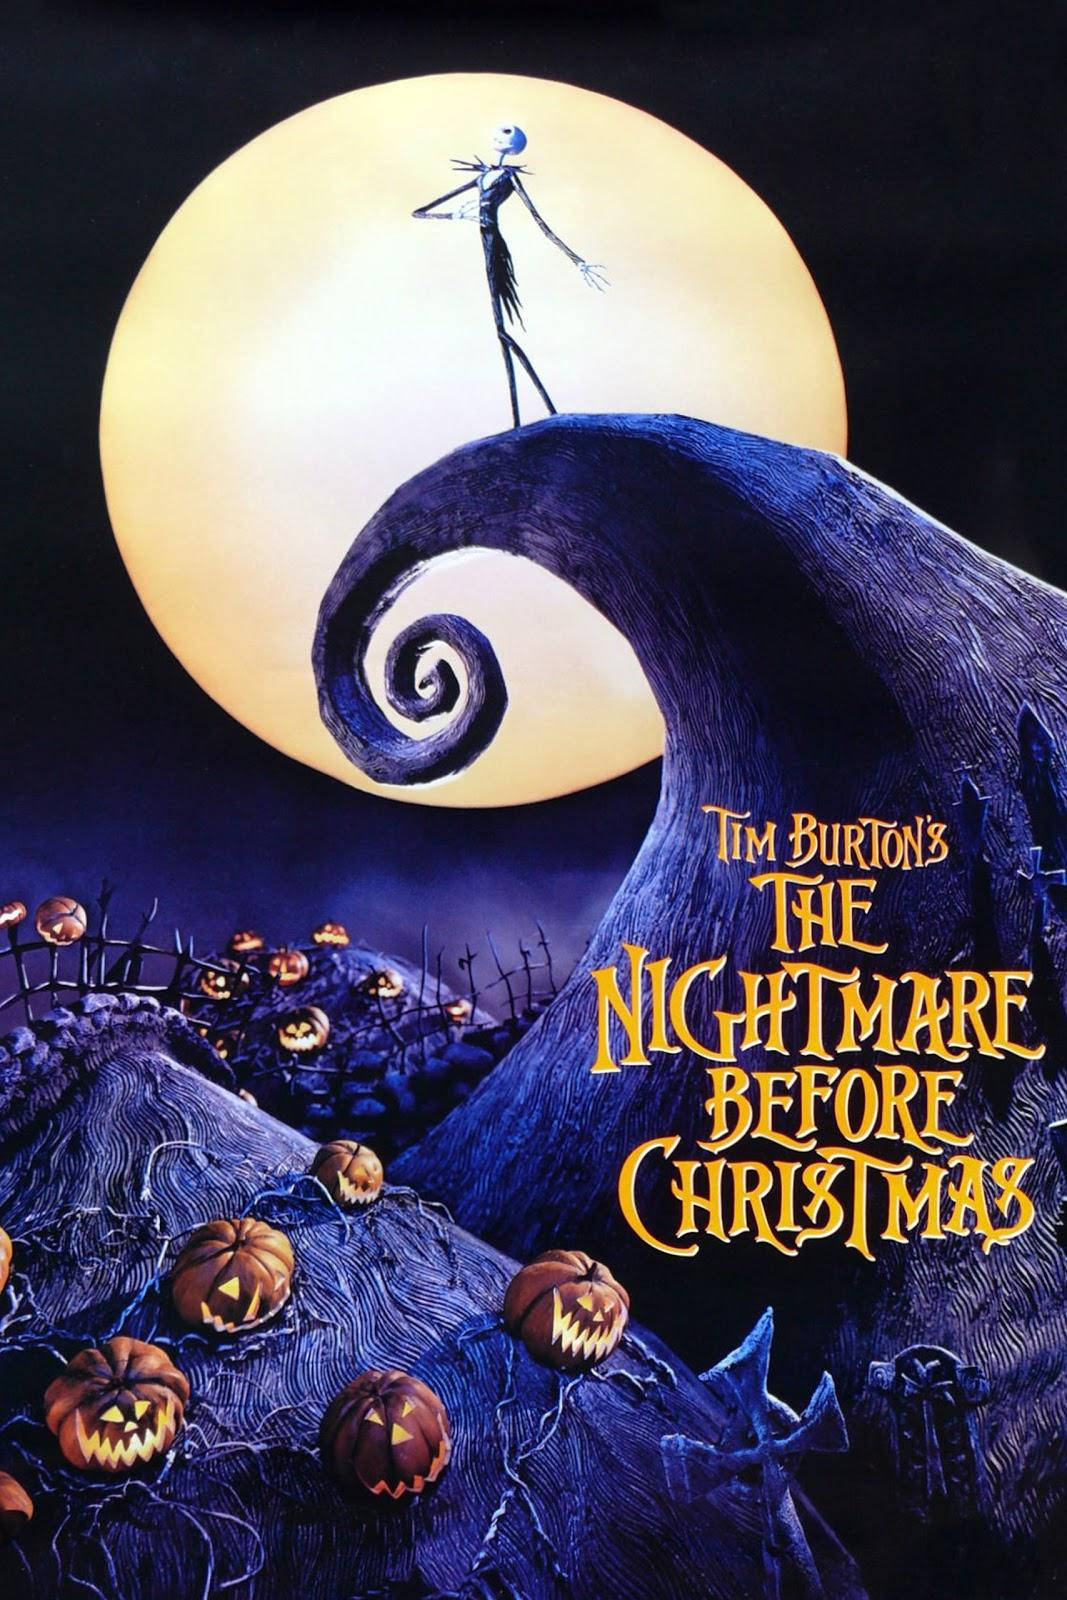 Vintage The Nightmare Before Christmas Poster Wallpaper